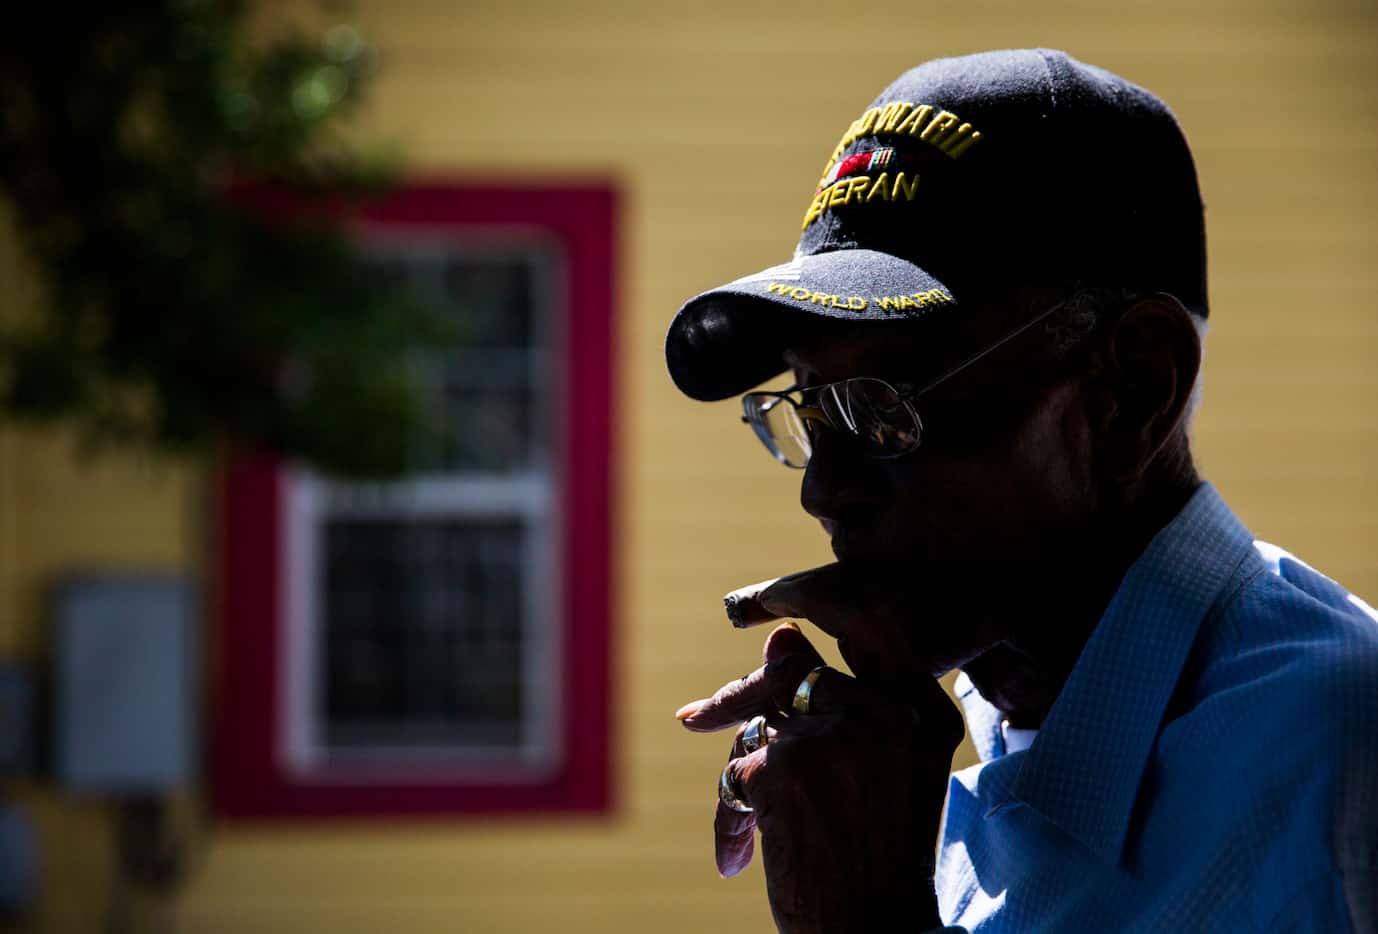 "It always feels good out here," Richard Overton says on his front porch, where he spends...